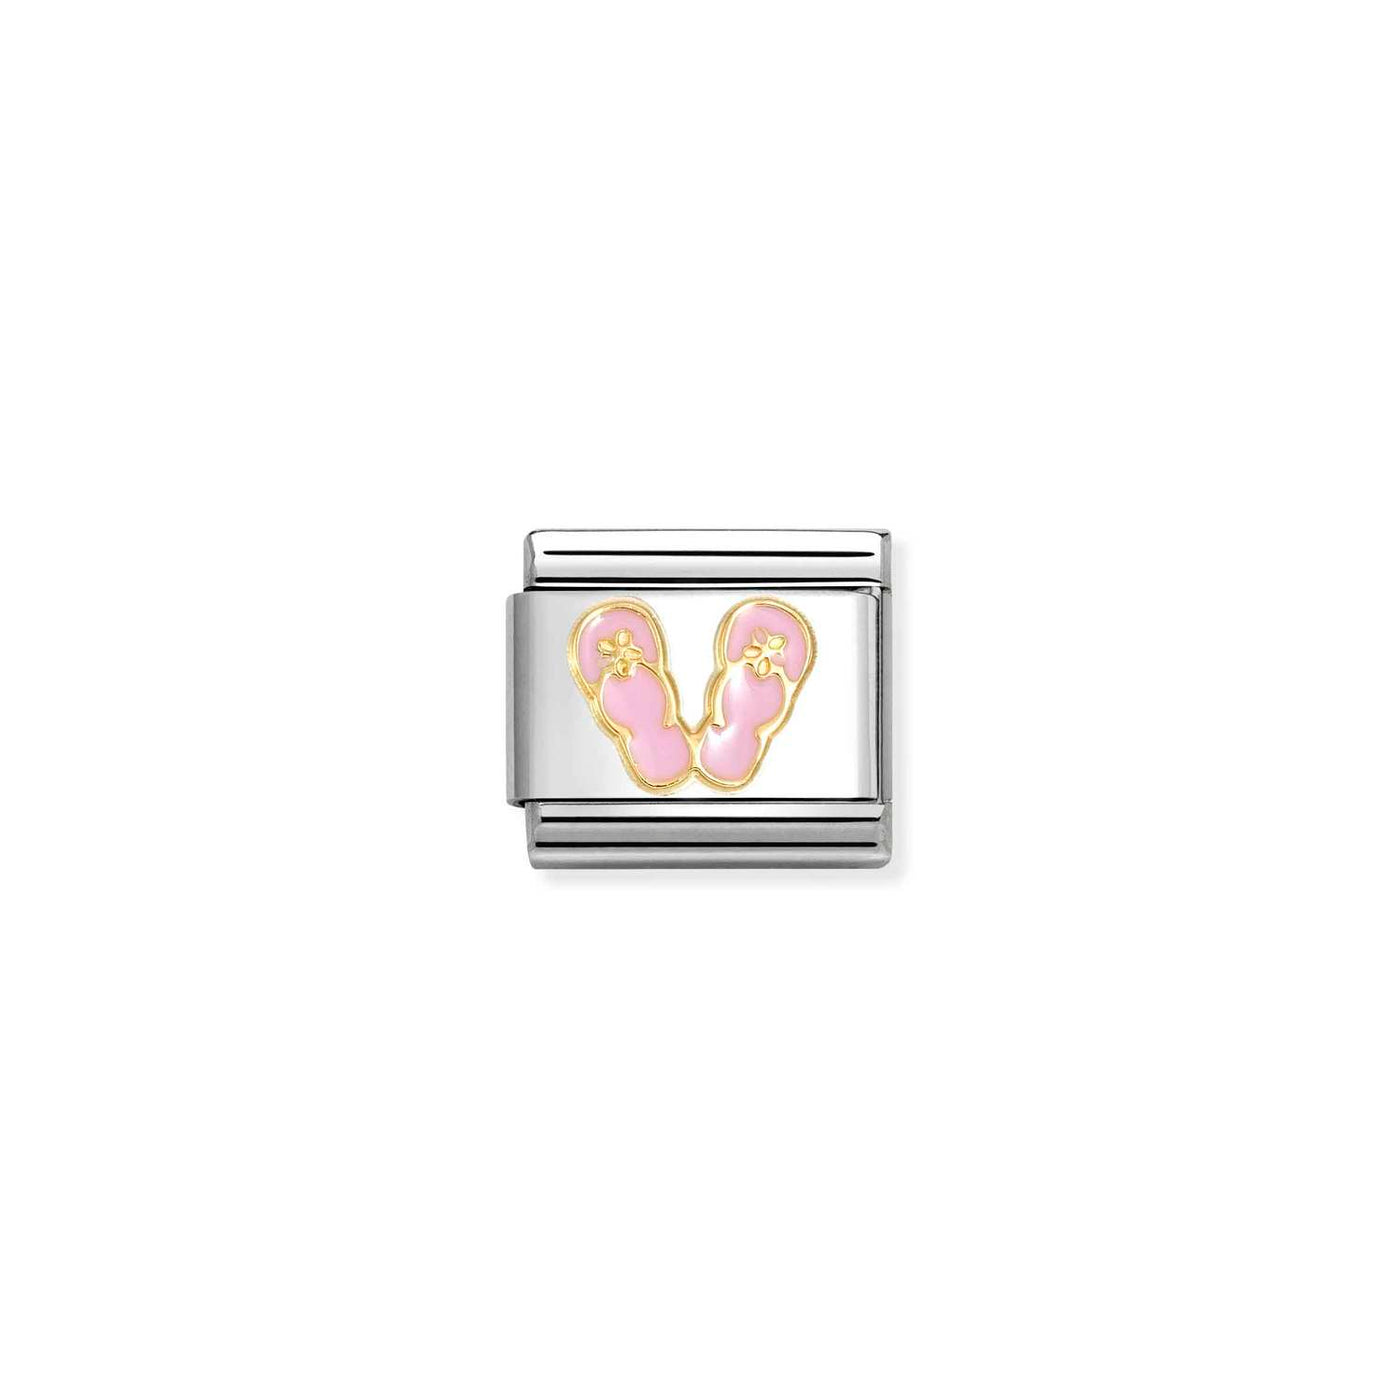 Nomination Classic 18ct Gold and Pink Flip Flop Charm